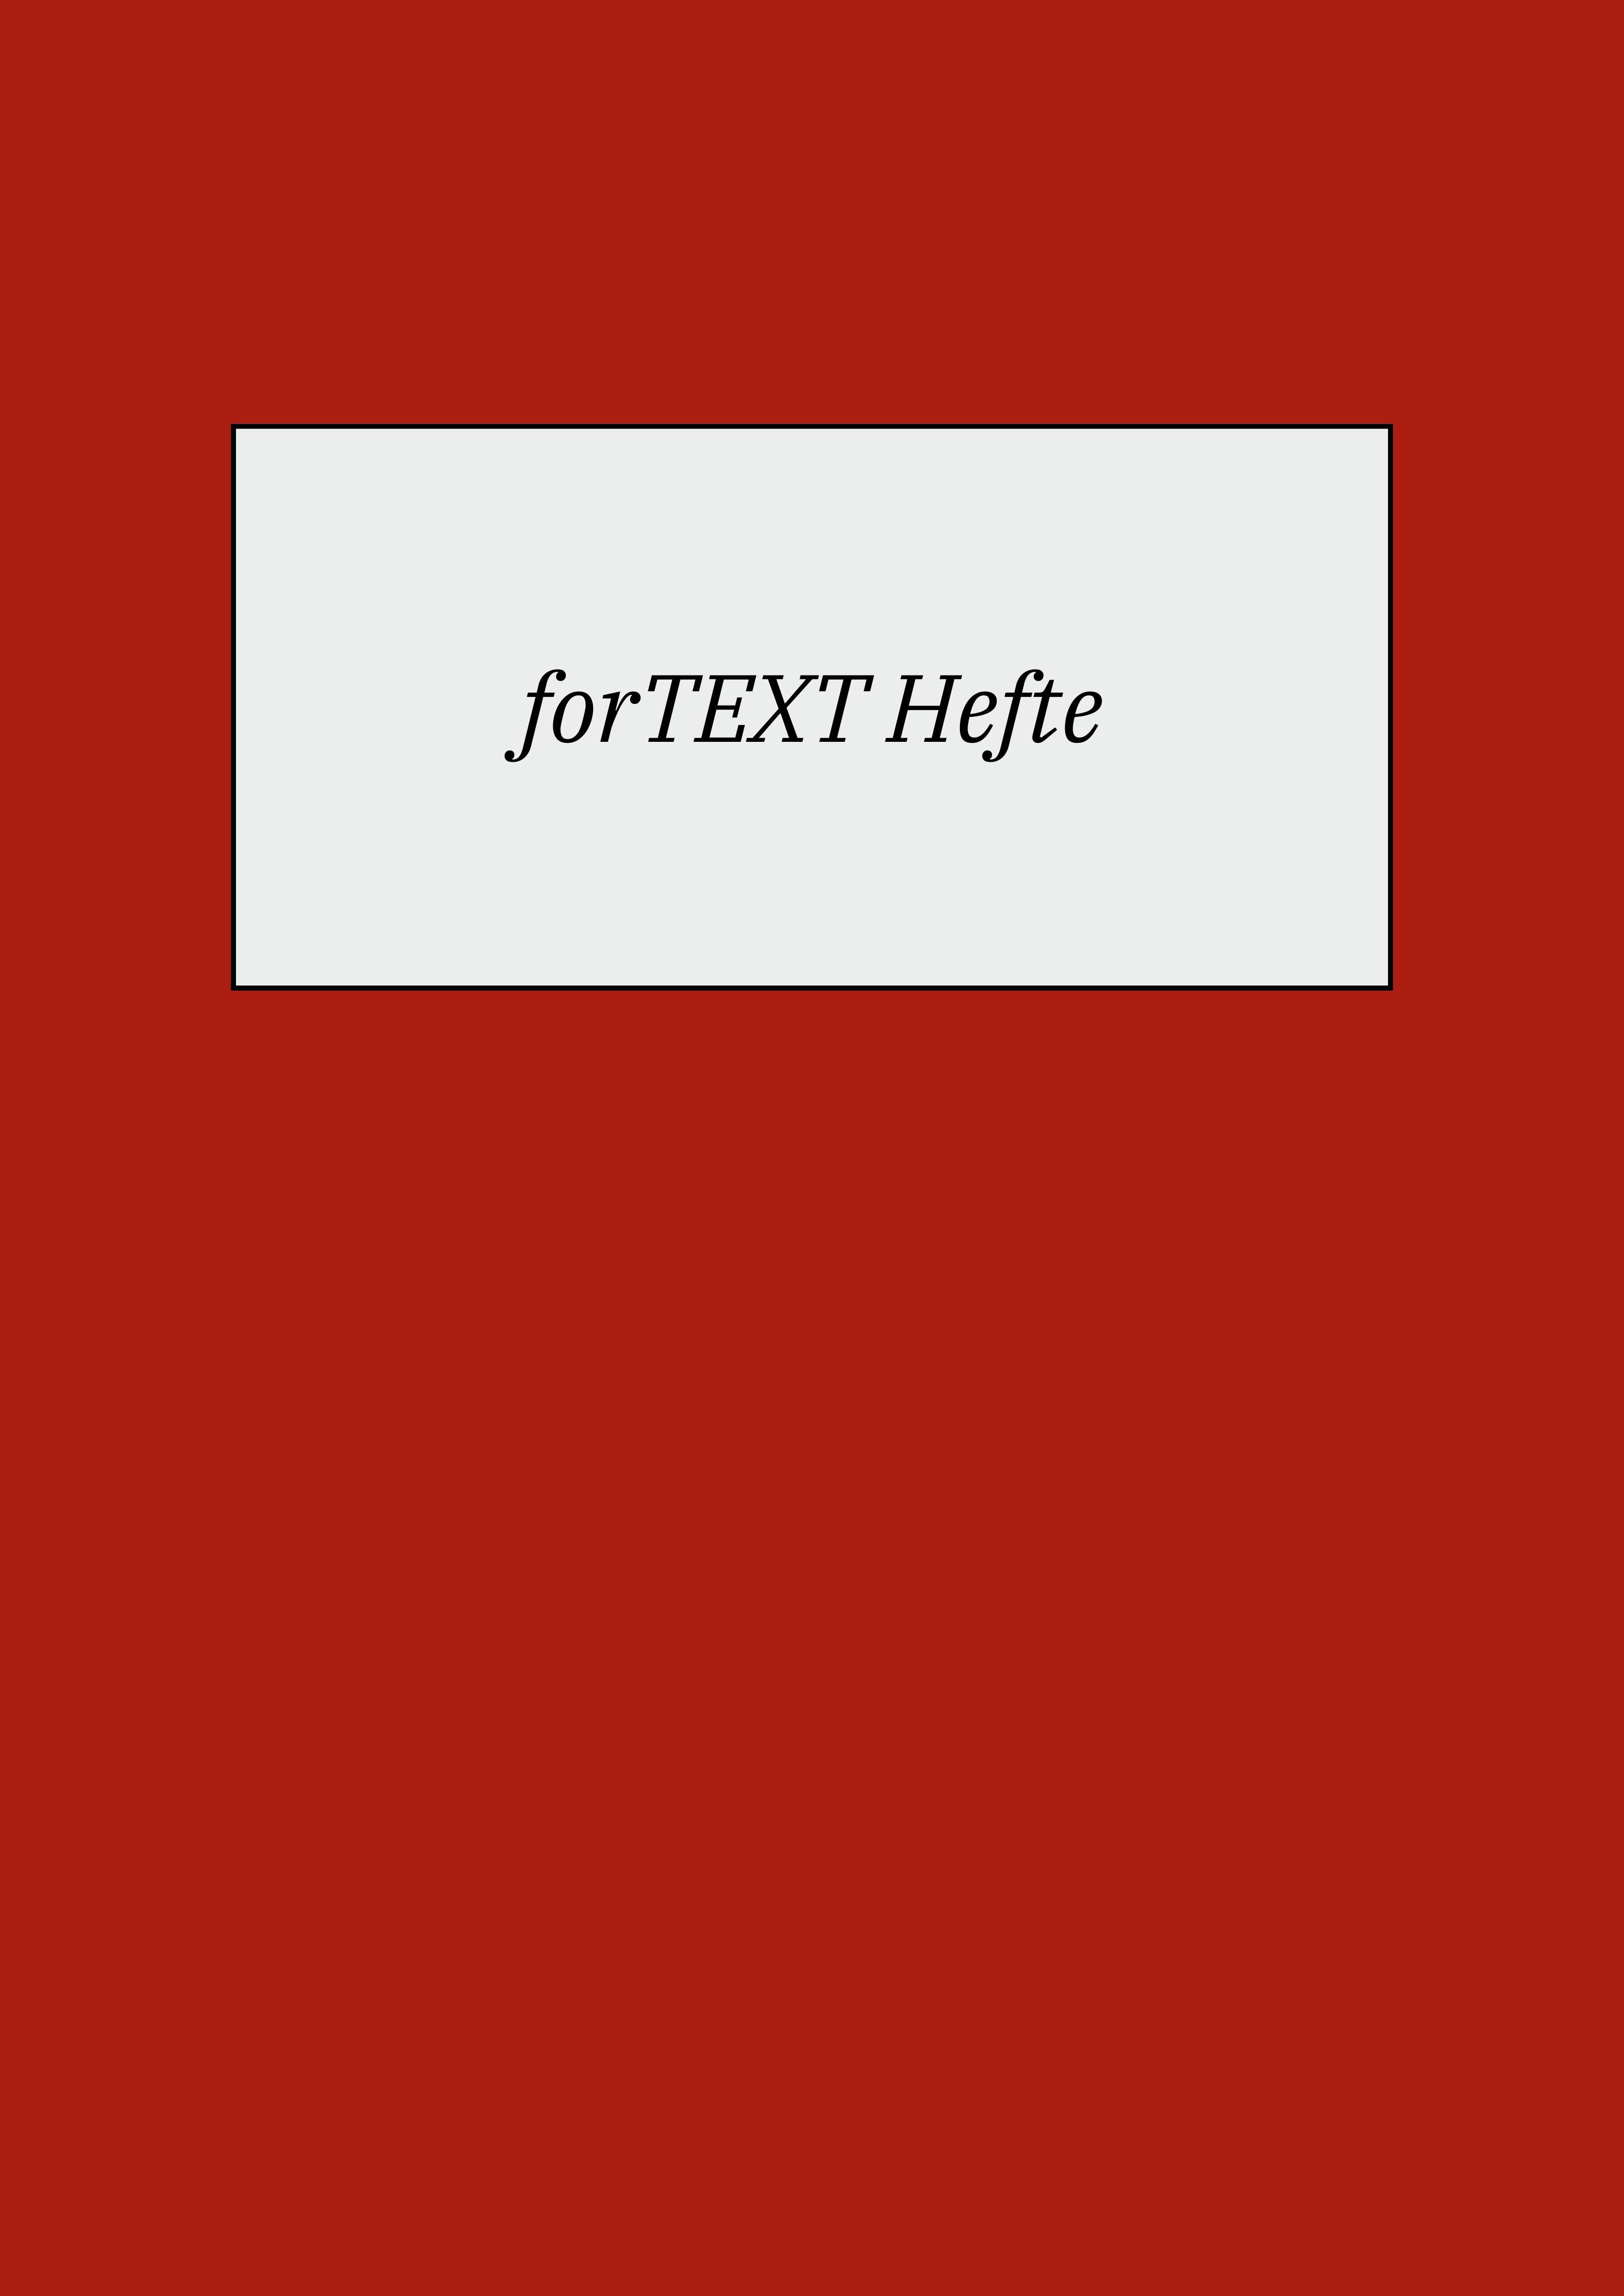 forTEXT